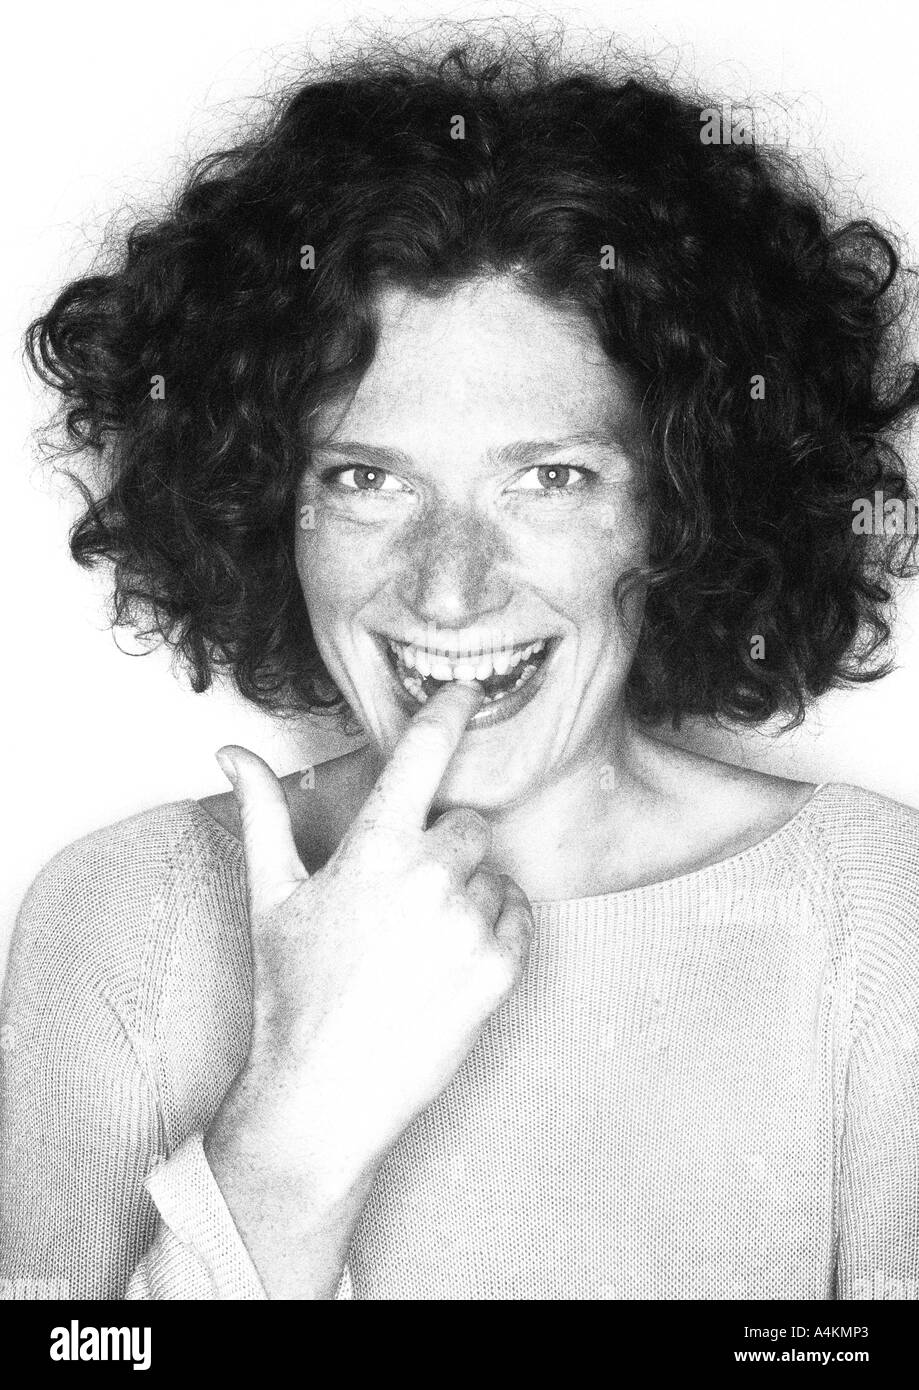 Woman smiling with finger in mouth, portrait, b&w. Stock Photo